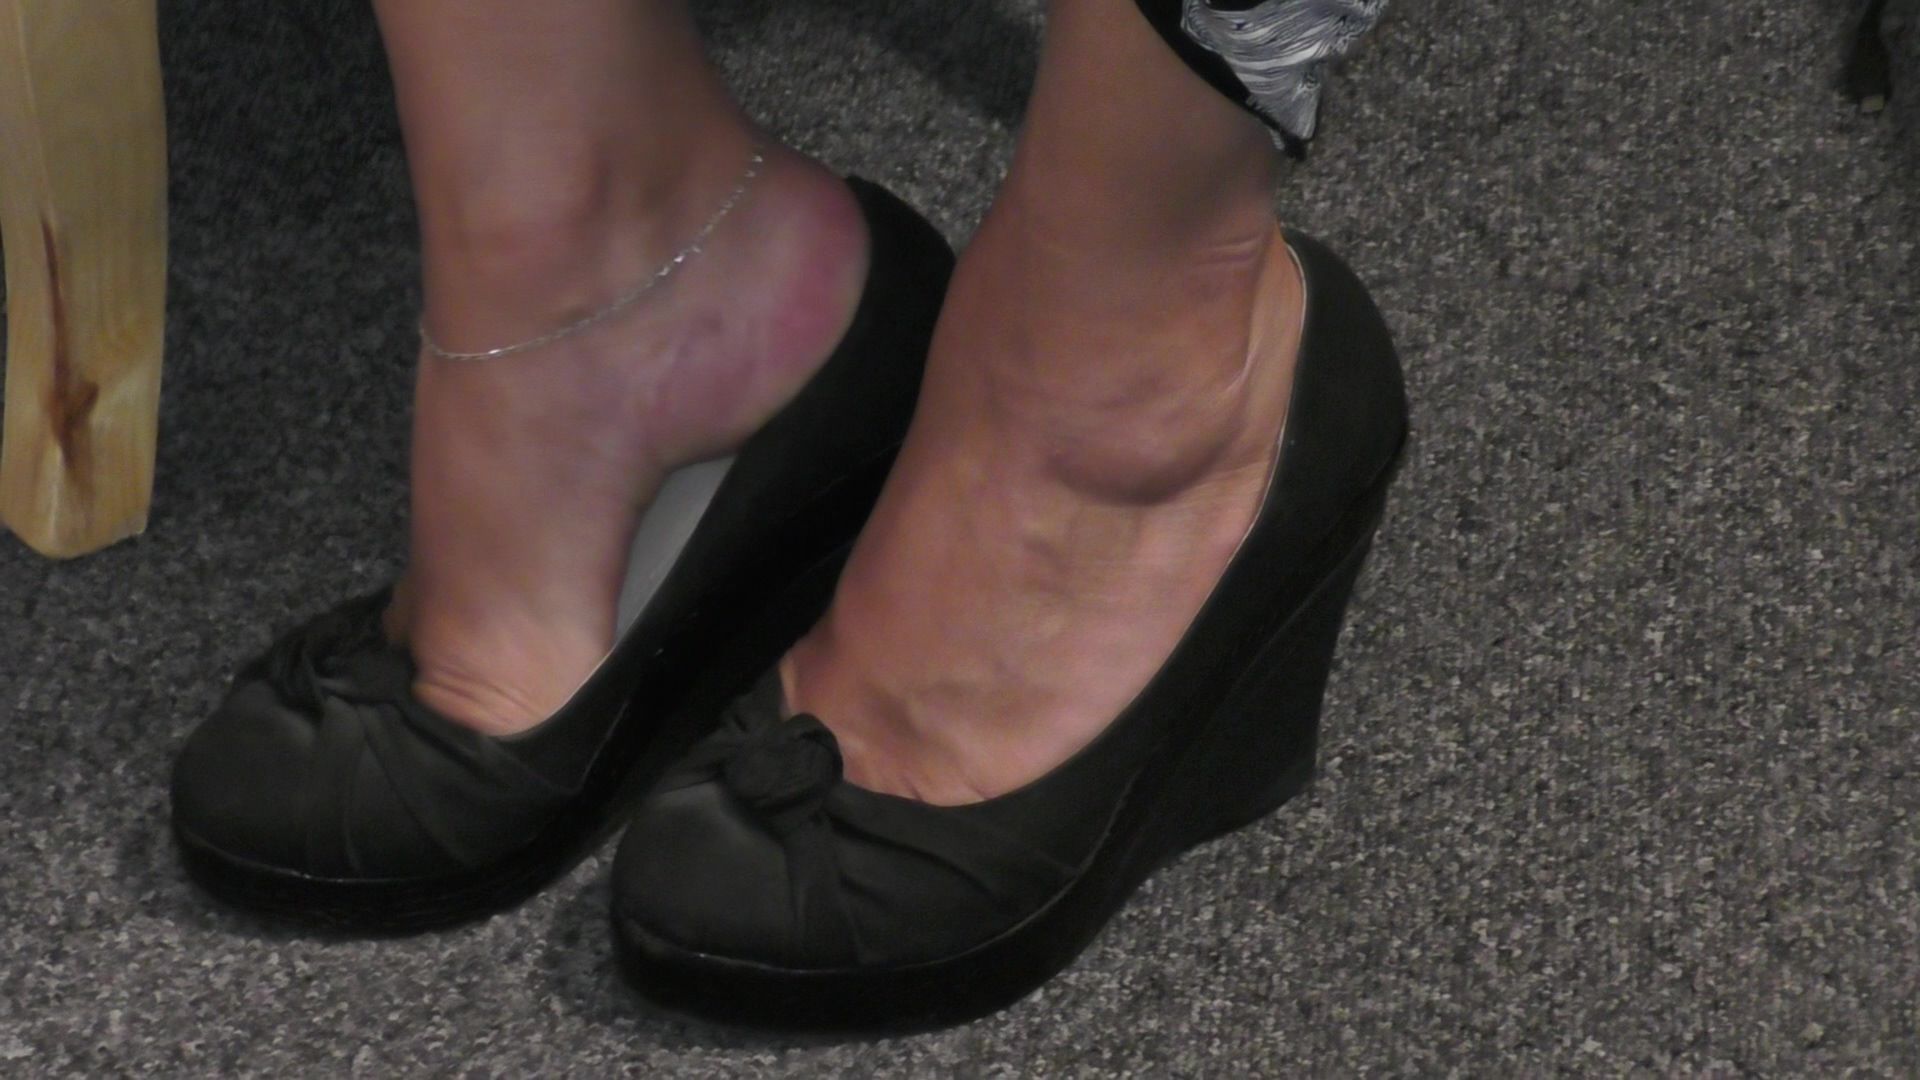 Three Some Amateur Chick With Sensitive Feet Feels Very Comfortable Wearing Black Shoes With Pupms Hentai - 1